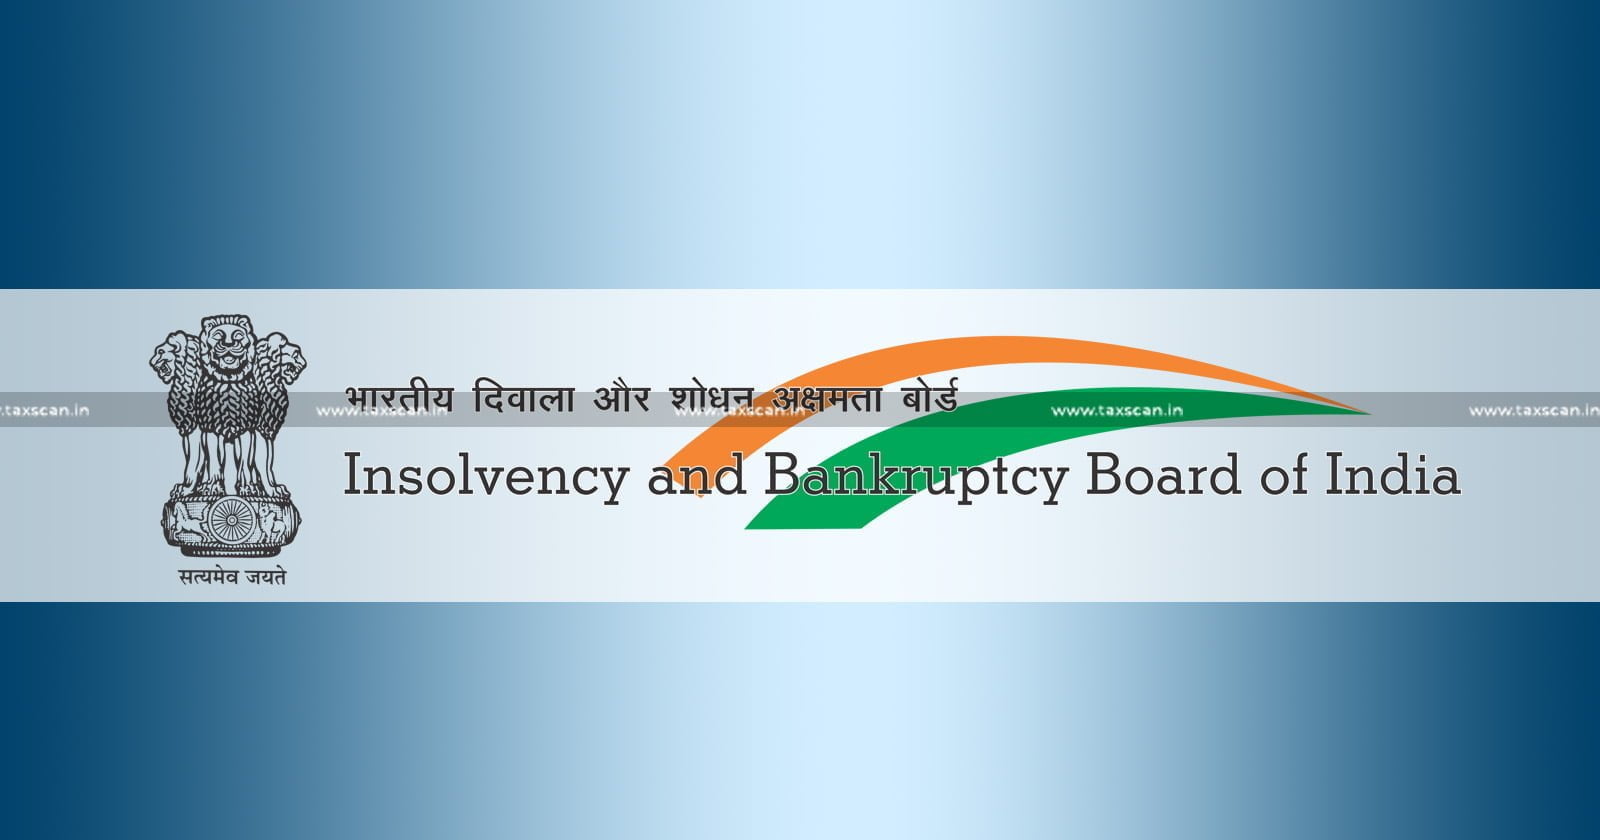 Insolvency and Bankruptcy Board of India - IBBI - Insolvency Professional Agencies - taxscan